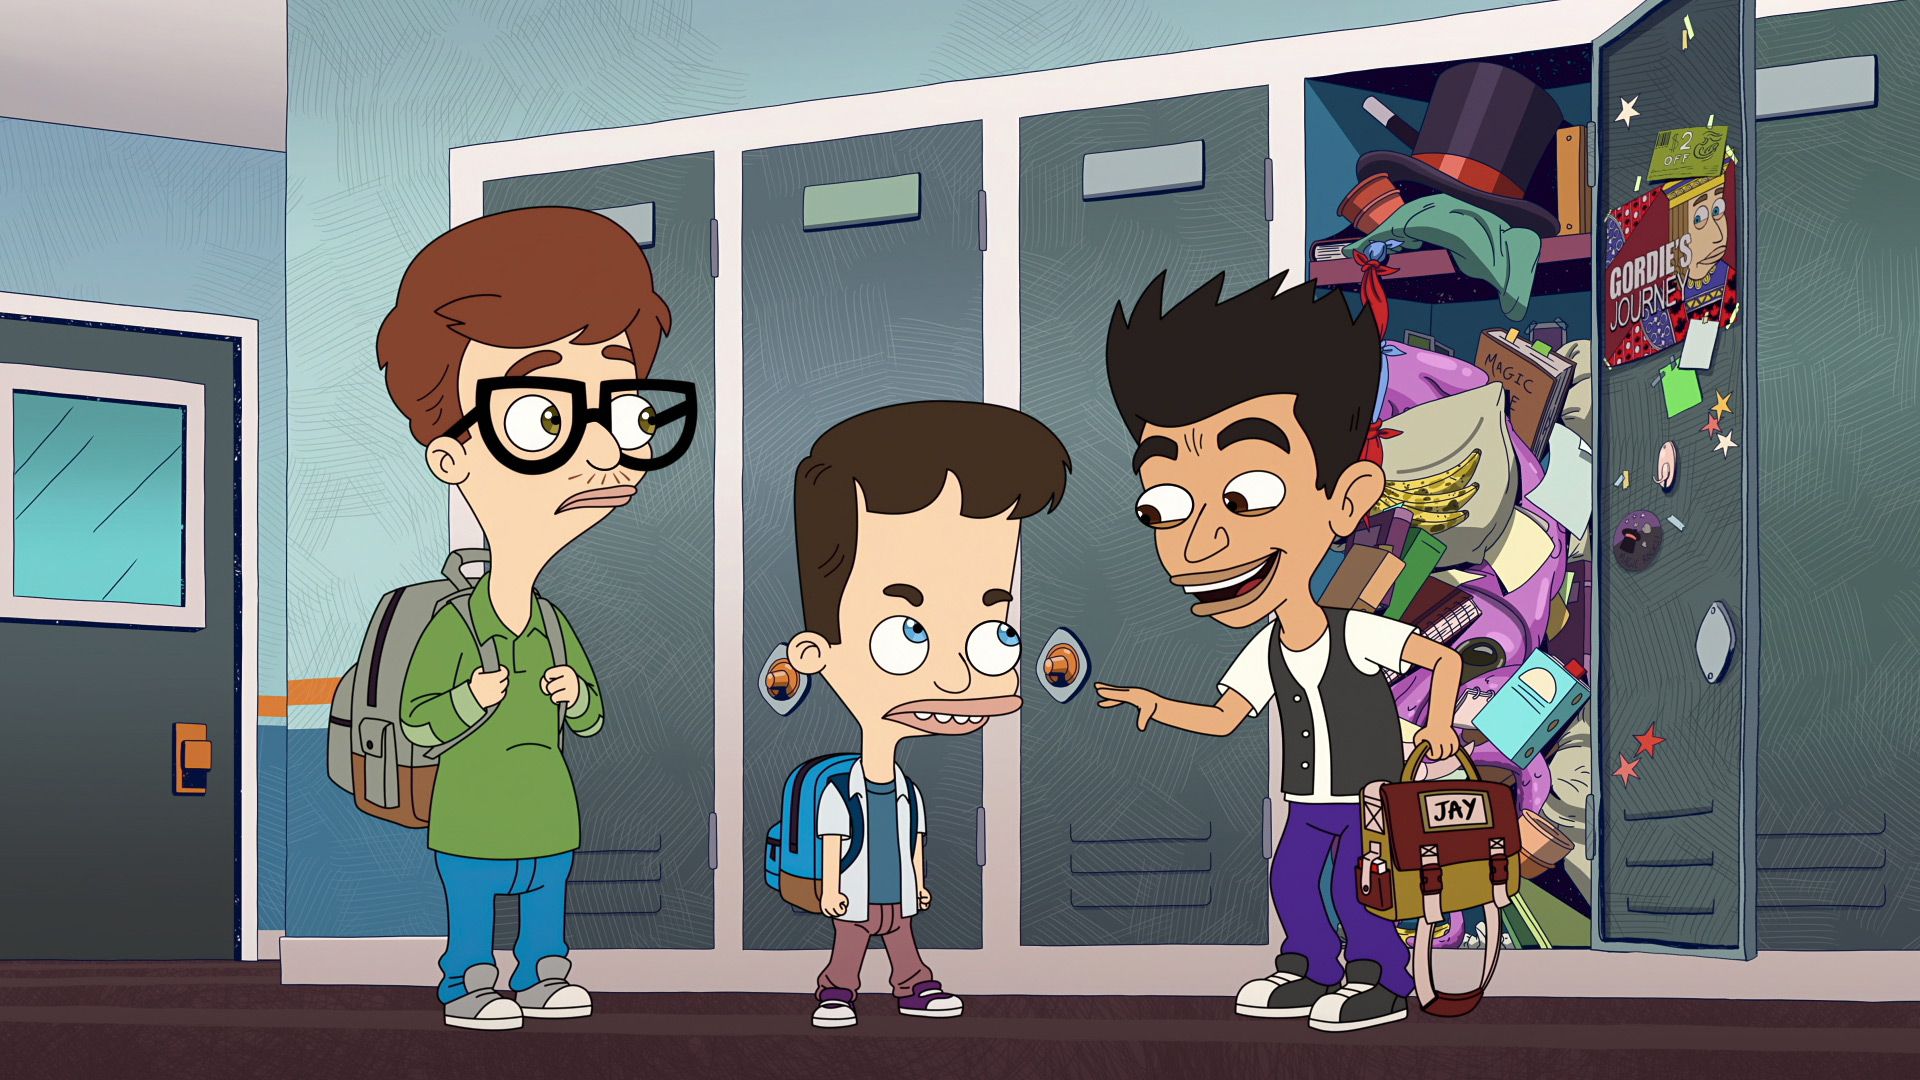 John Mulaney as Andrew, Nick Kroll as Nick and Jason Mantzoukas as Jay in Big Mouth.